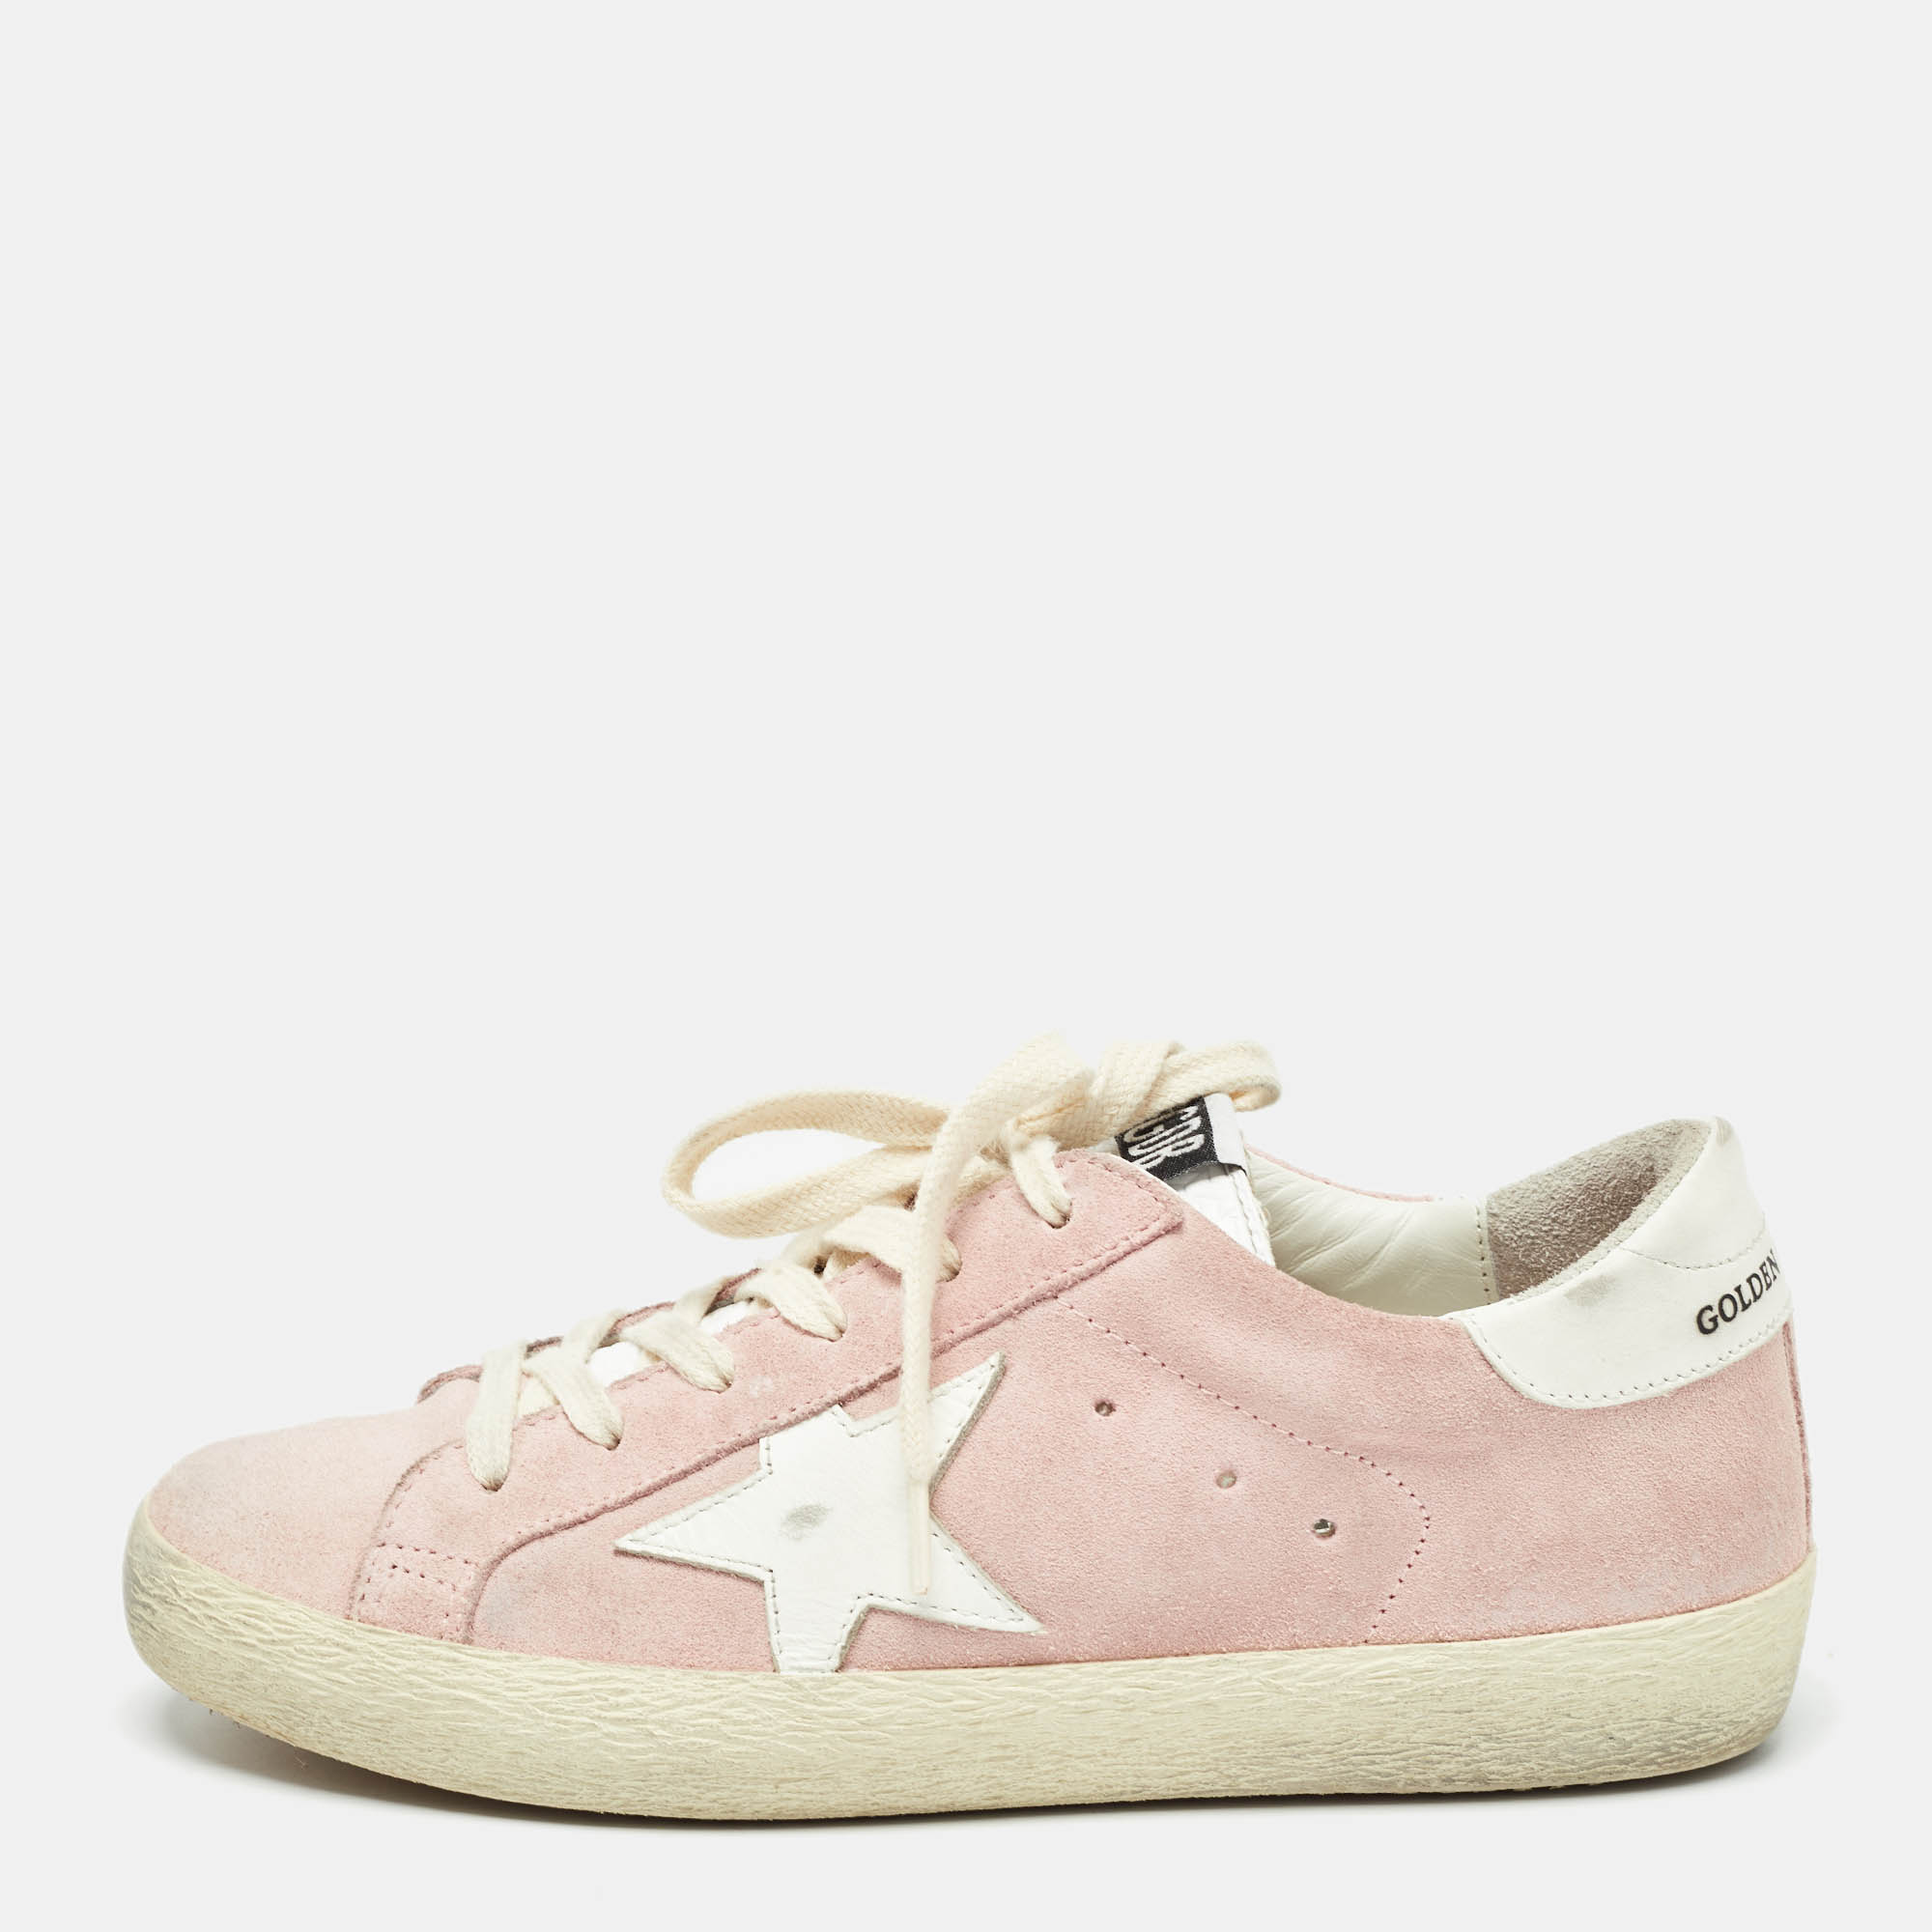 Golden goose pink/white suede and leather superstar sneakers size 36